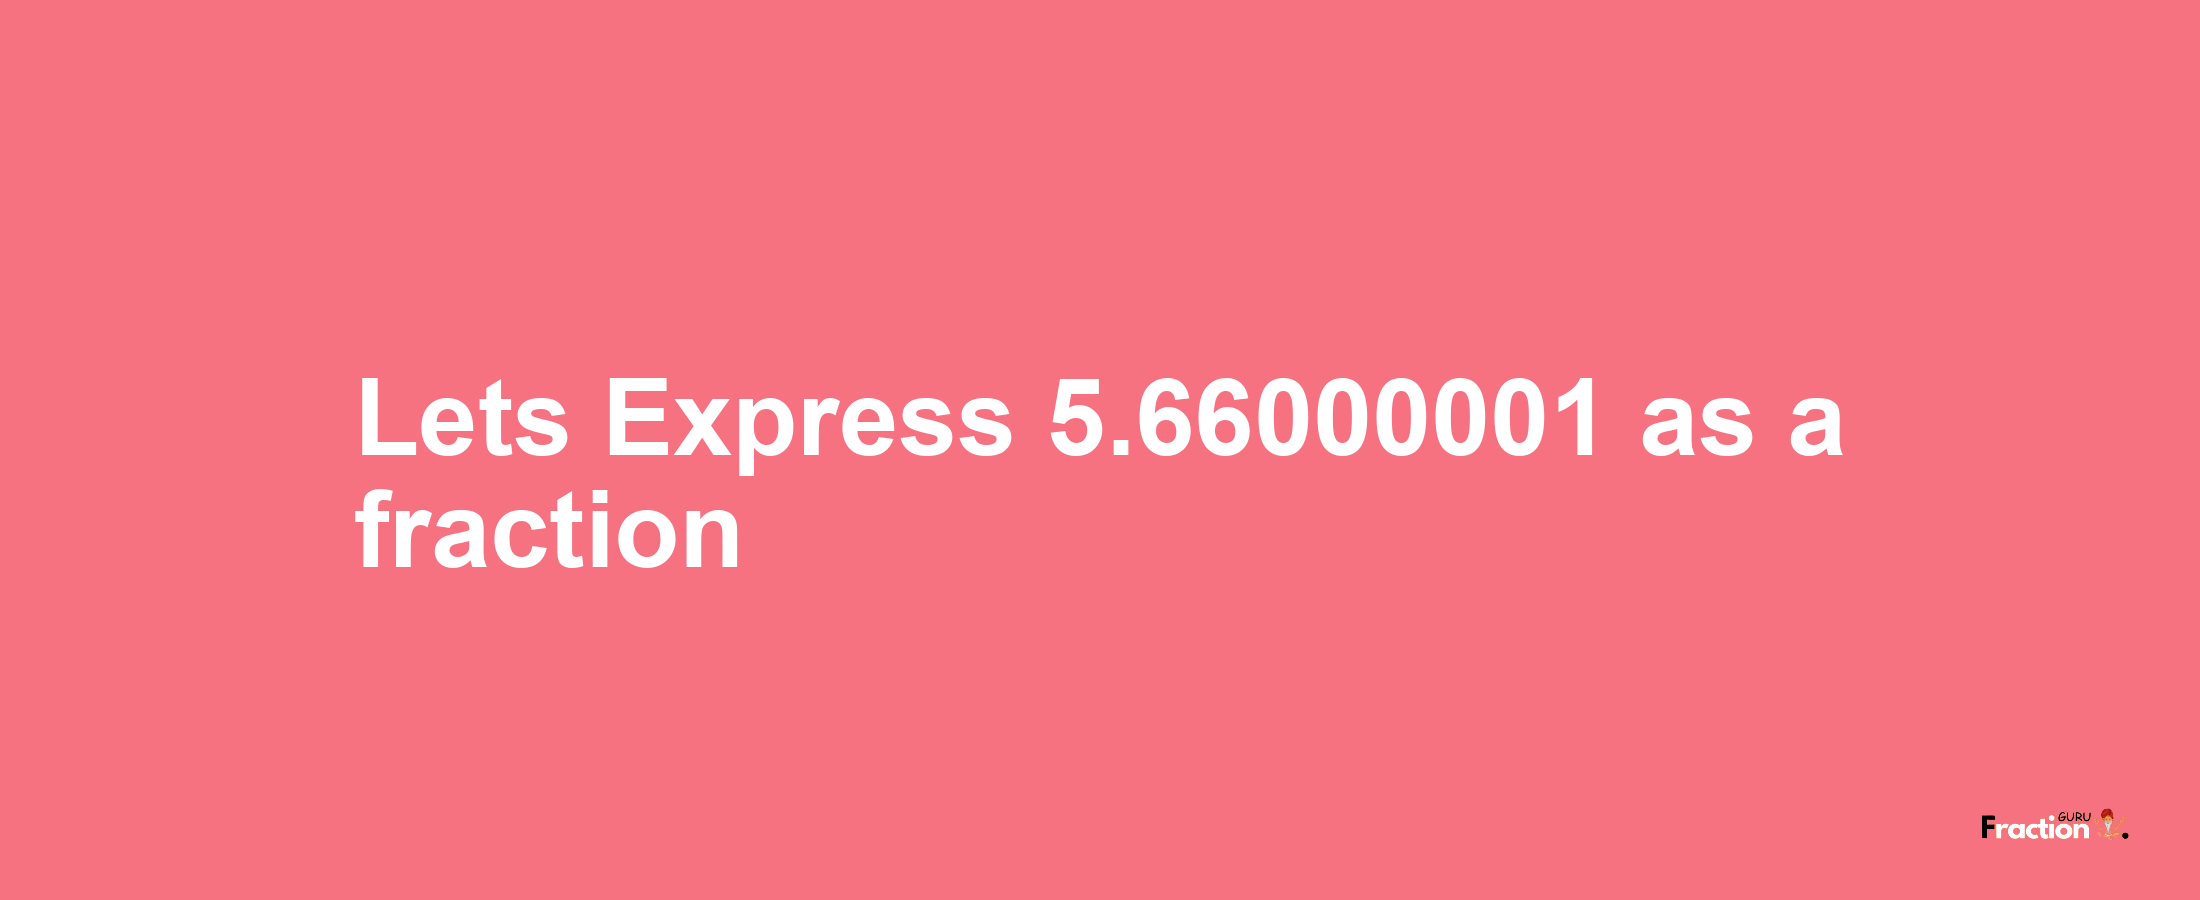 Lets Express 5.66000001 as afraction